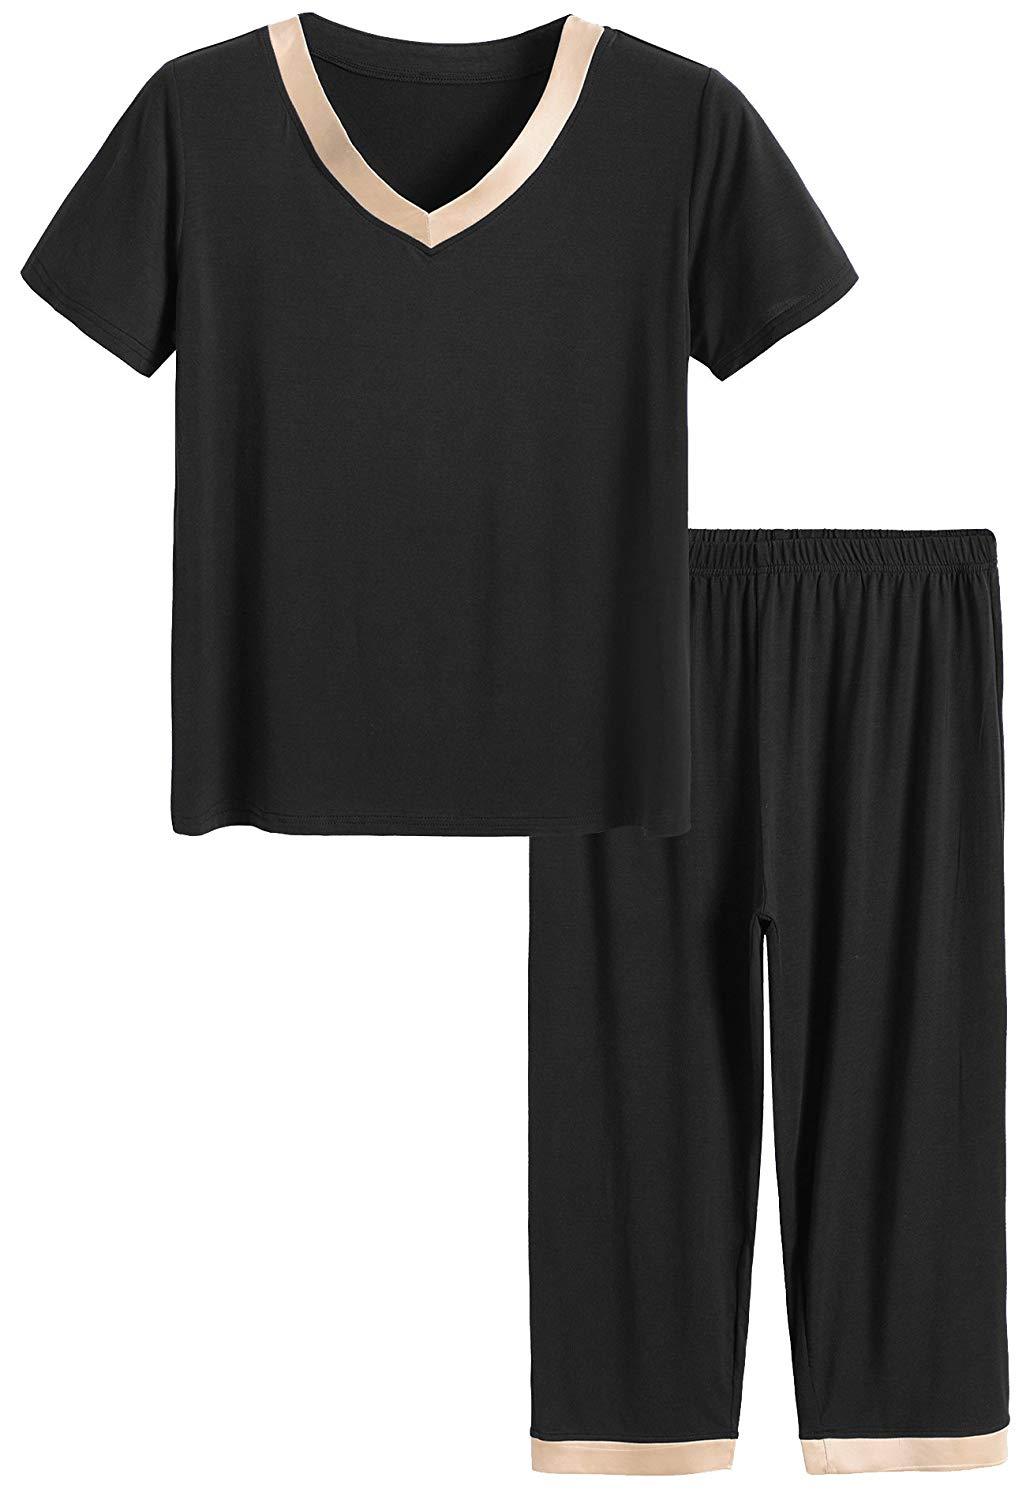 Jostar Women's Stretchy Capri Pant Set Short Sleeve  Print,903BN-SP-W215,Made in USA.Everyday wrinkle resistant, travel  friendly. Comfortable and trendy. – Jostar Online